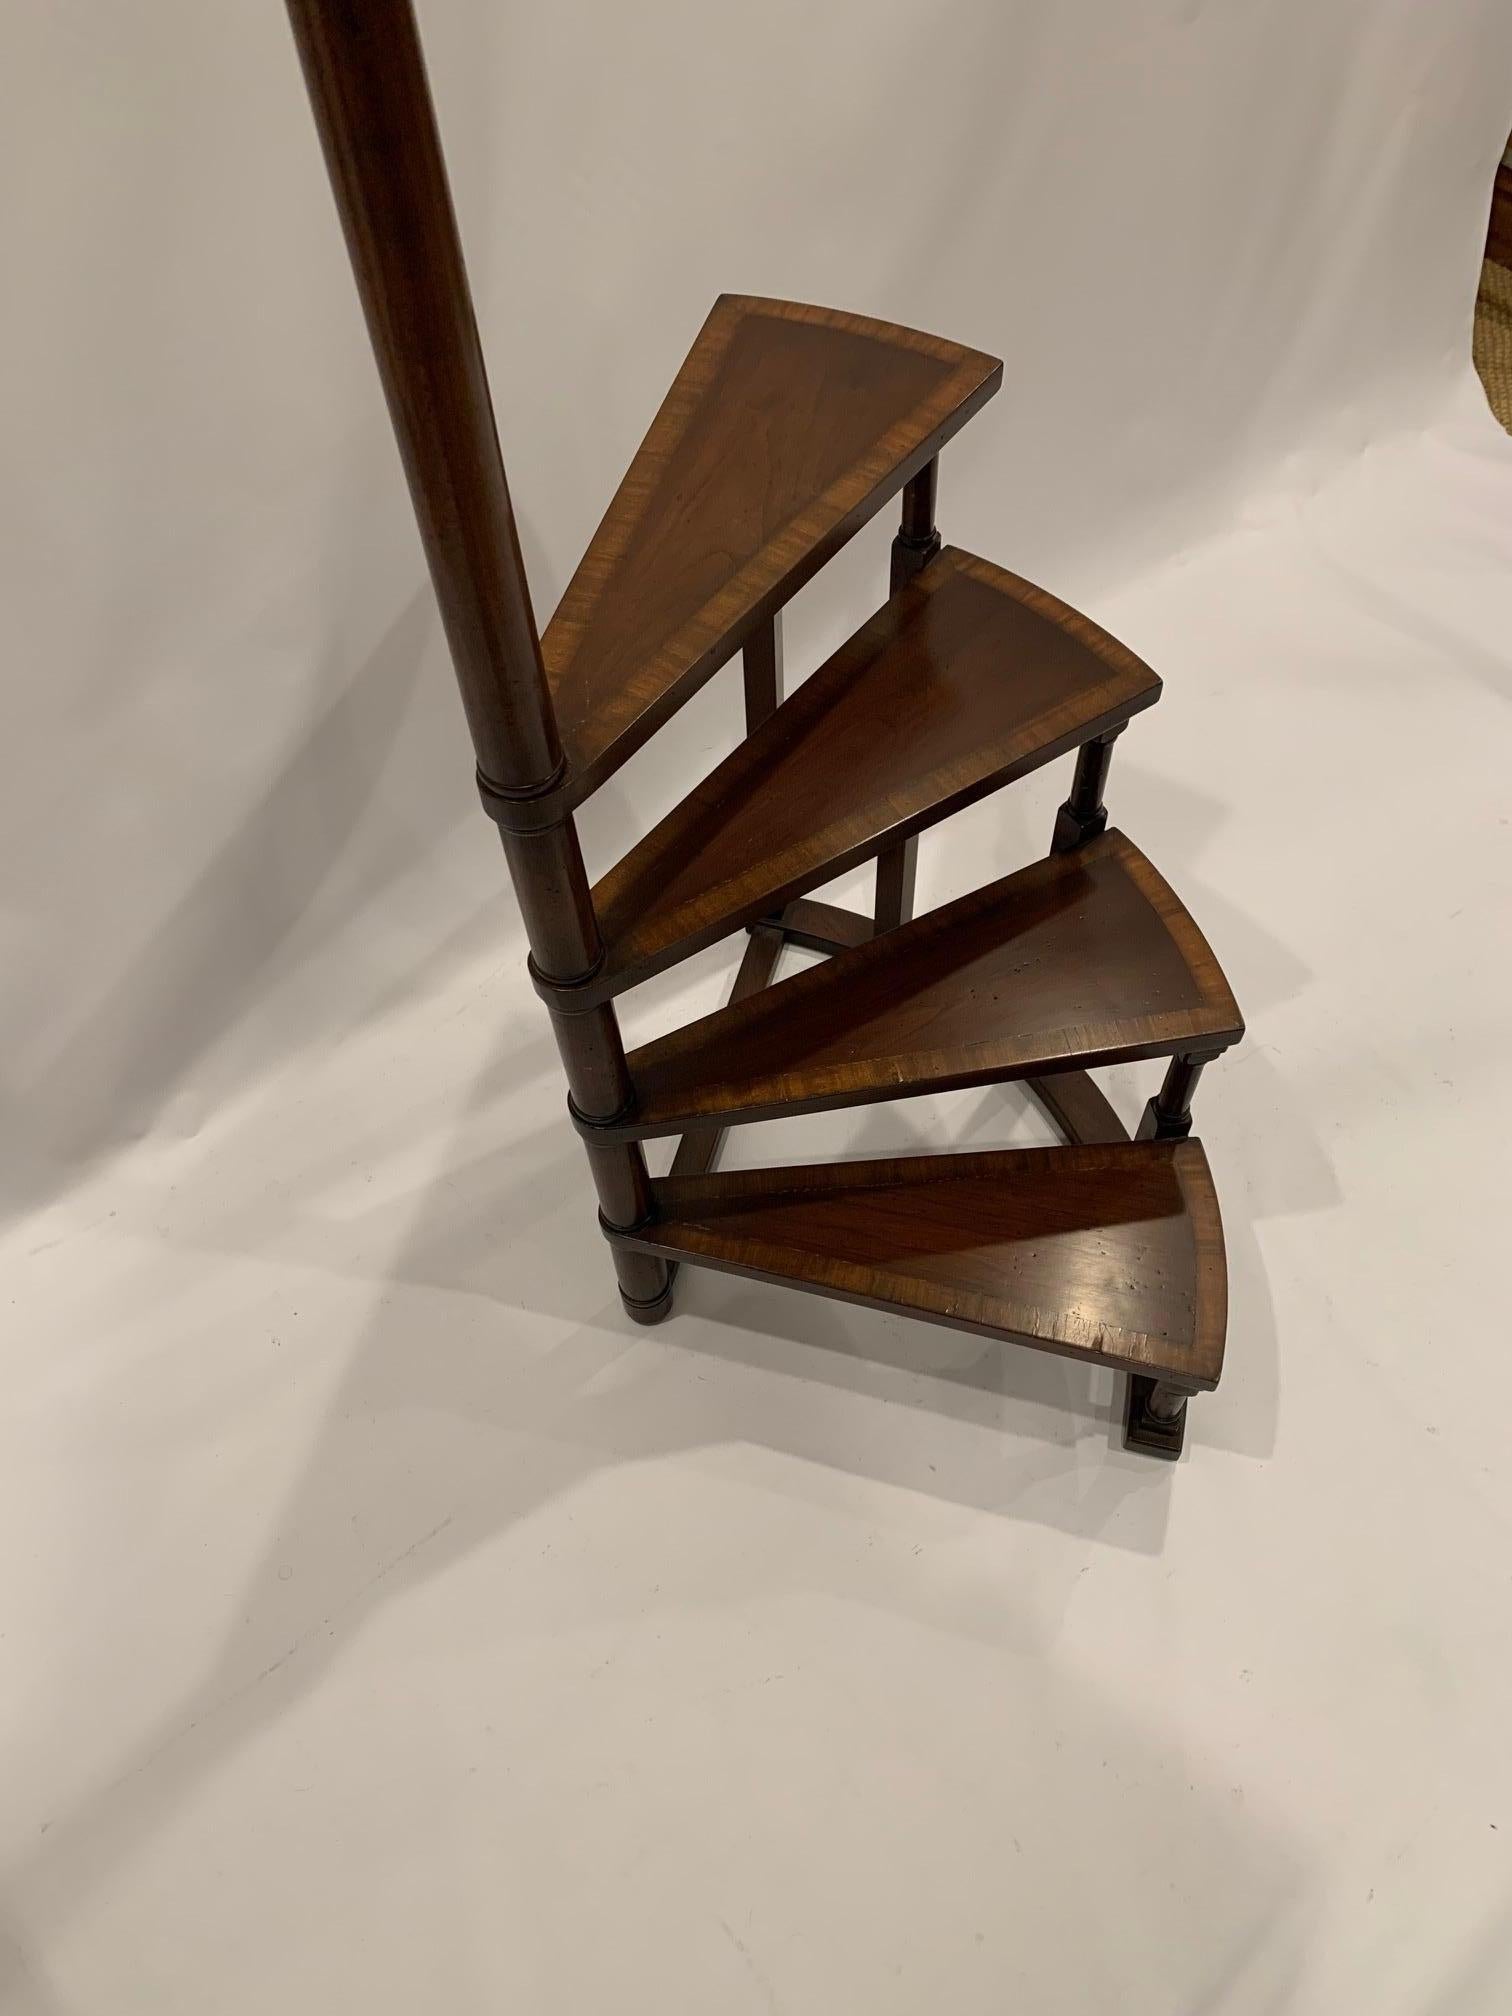 Lovely banded mahogany library steps having an elegant spiral shape, 4 steps, and columnar handle with finial at the top. Meant to be used for display, or as an artful freestanding sculptural piece, not as functional steps.